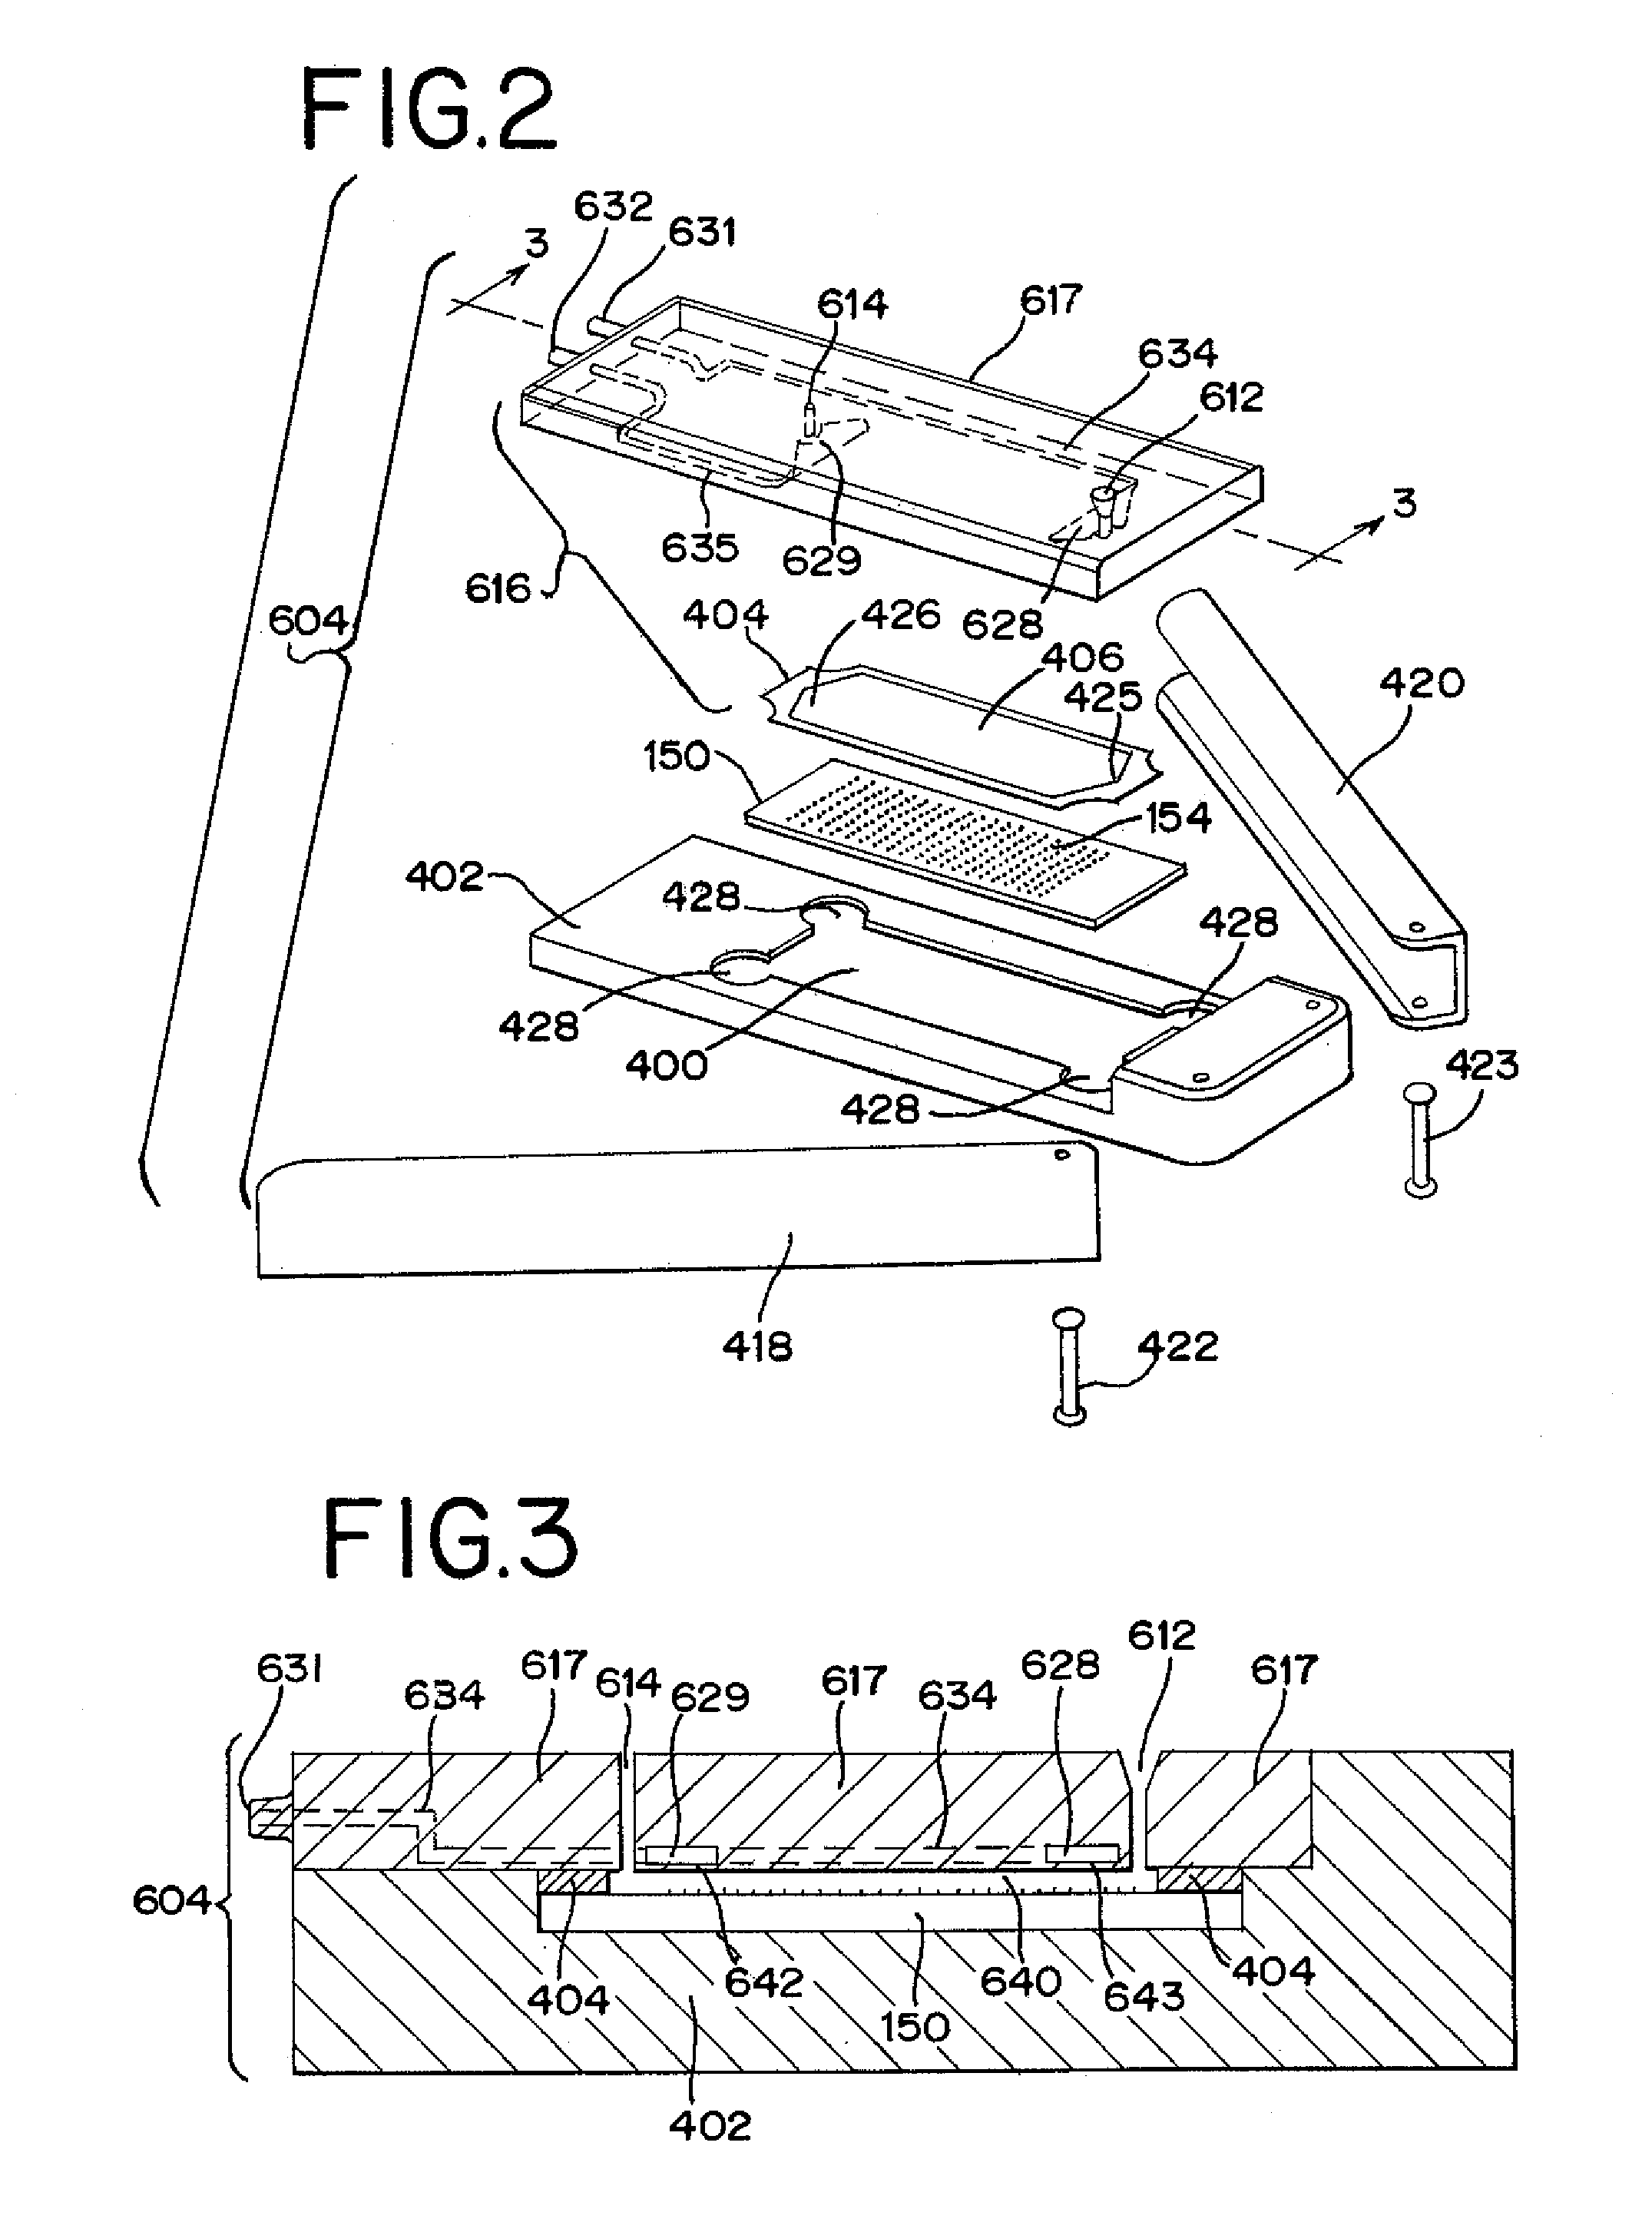 Method and system for microfluidic interfacing to arrays